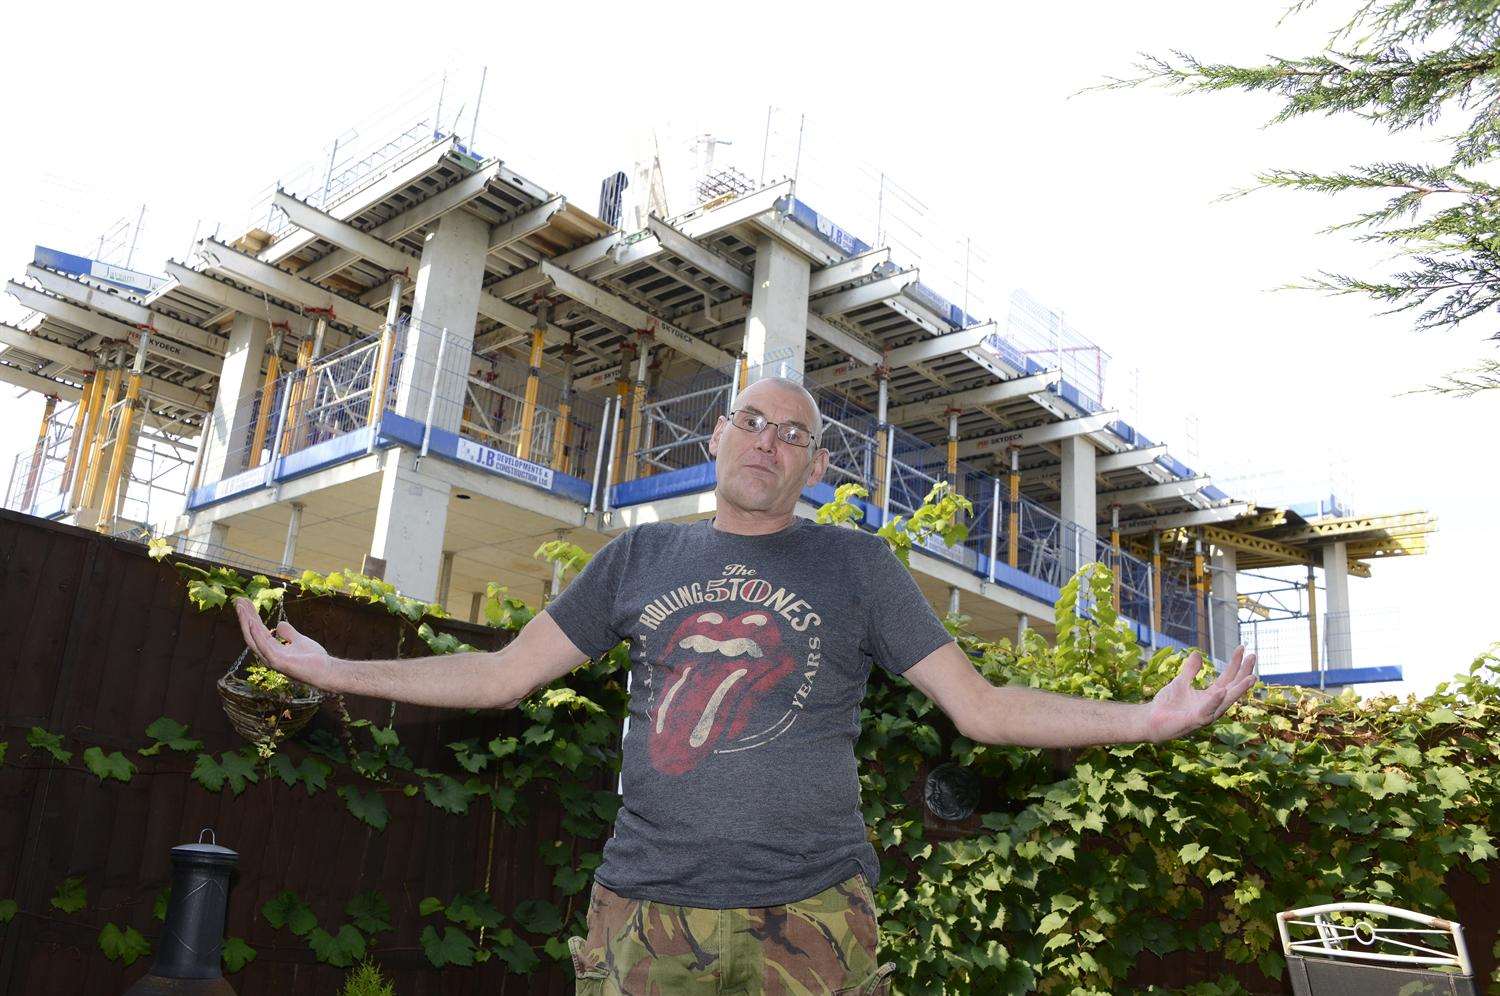 Mr Boylan says the construction work is making his life a misery